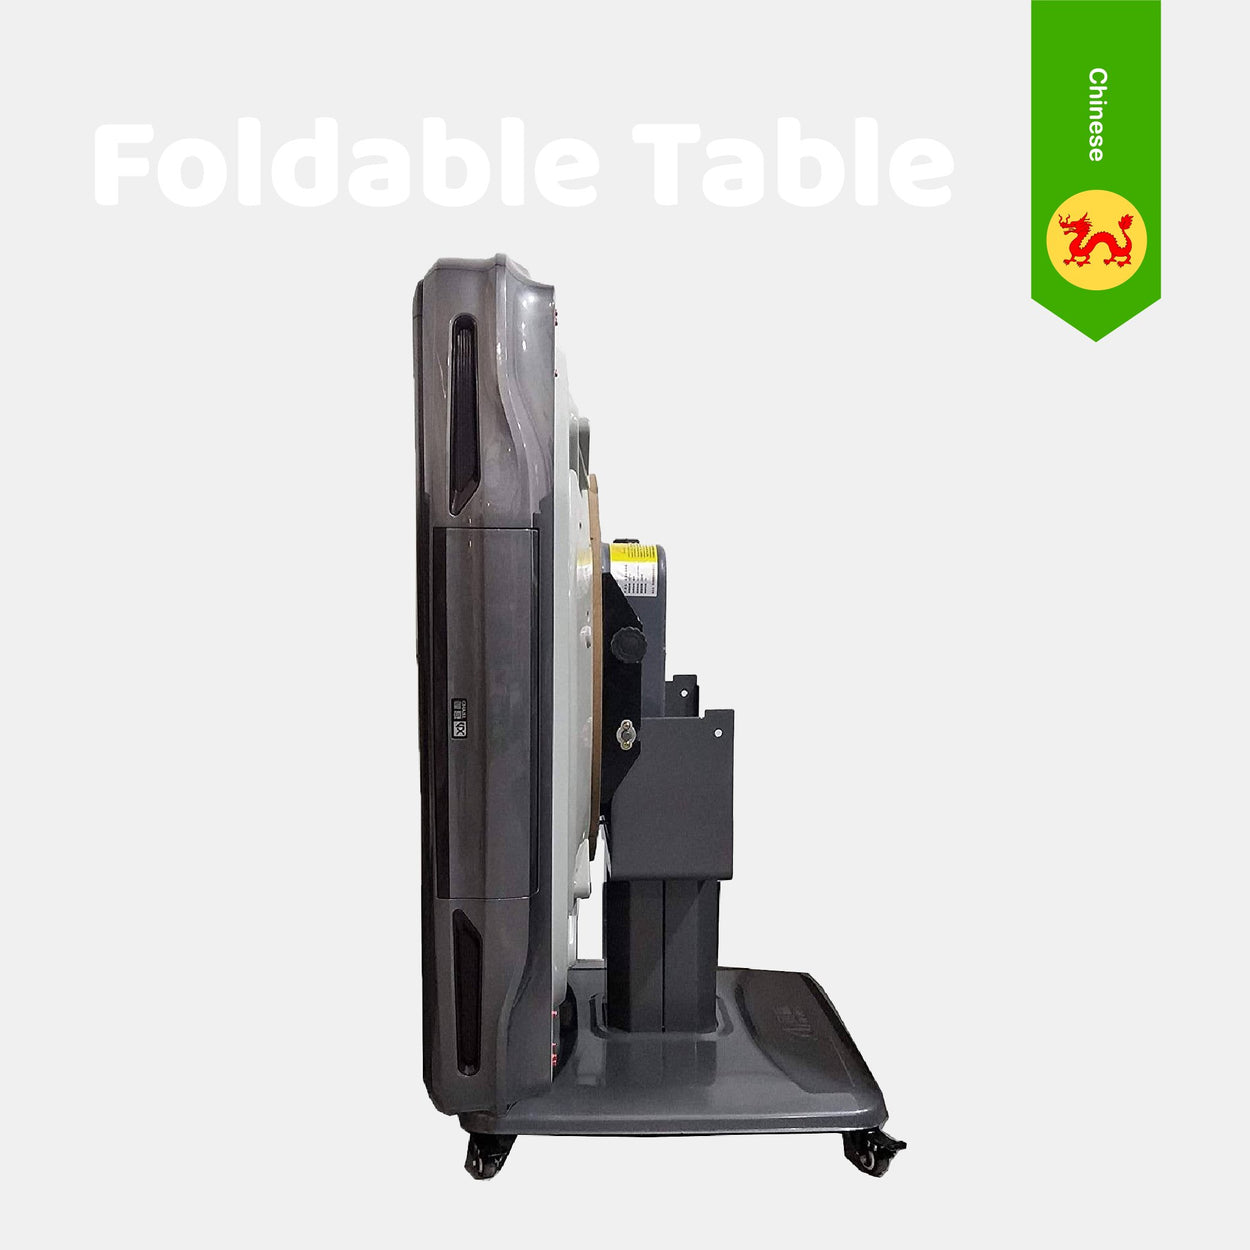 Chinese Foldable Table 可折叠款